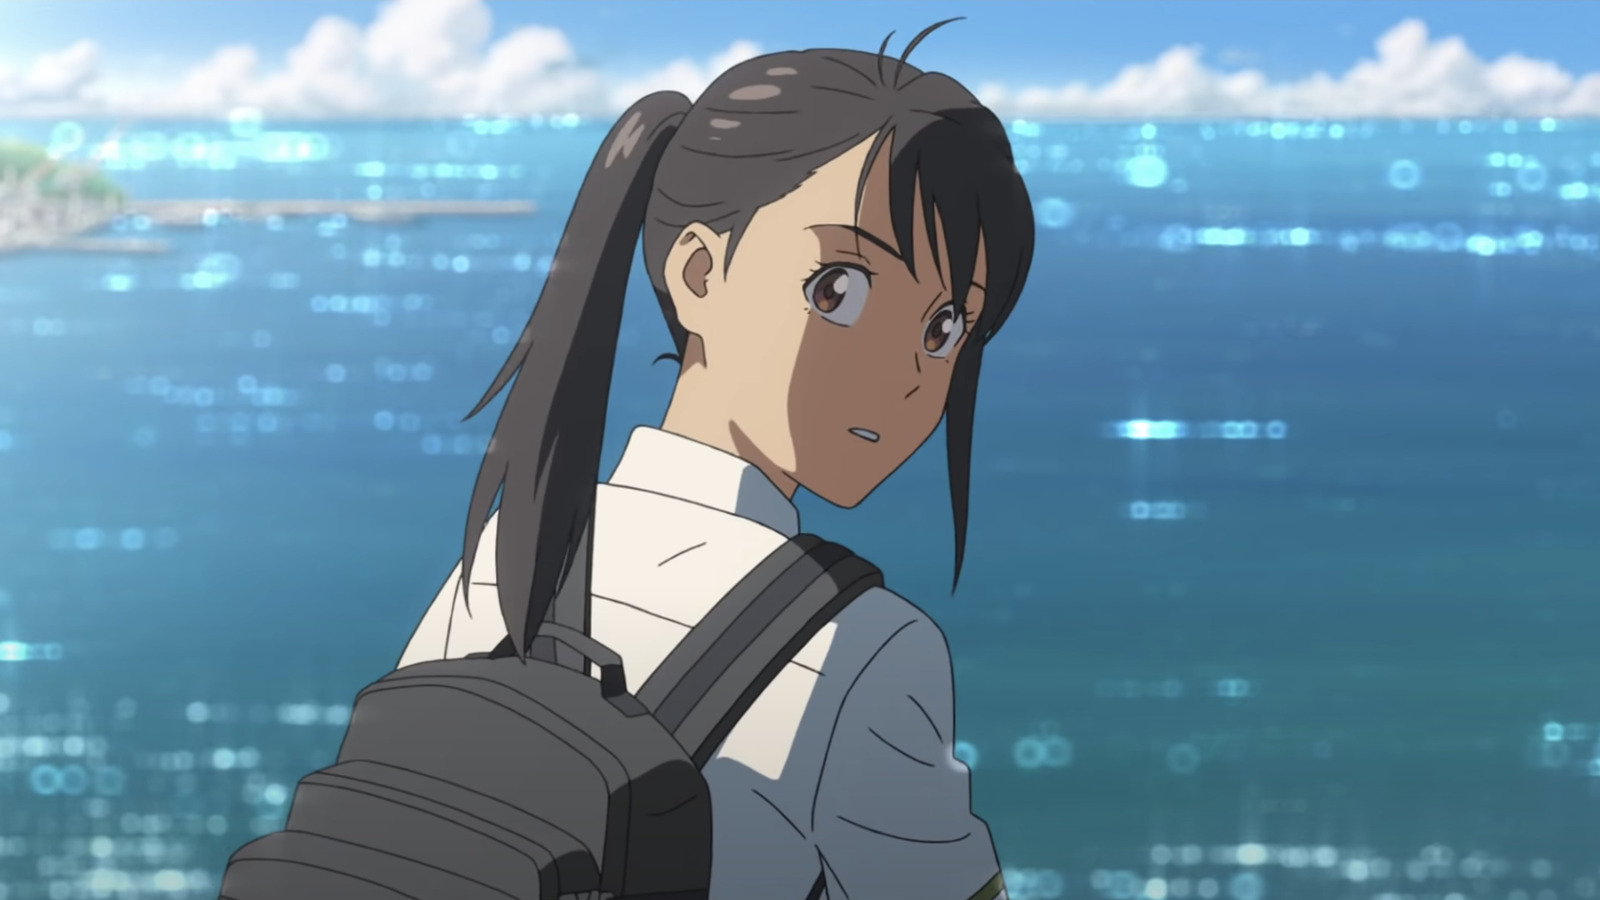 #Your Name Director Makoto Shinkai Returns With A Story About Closure